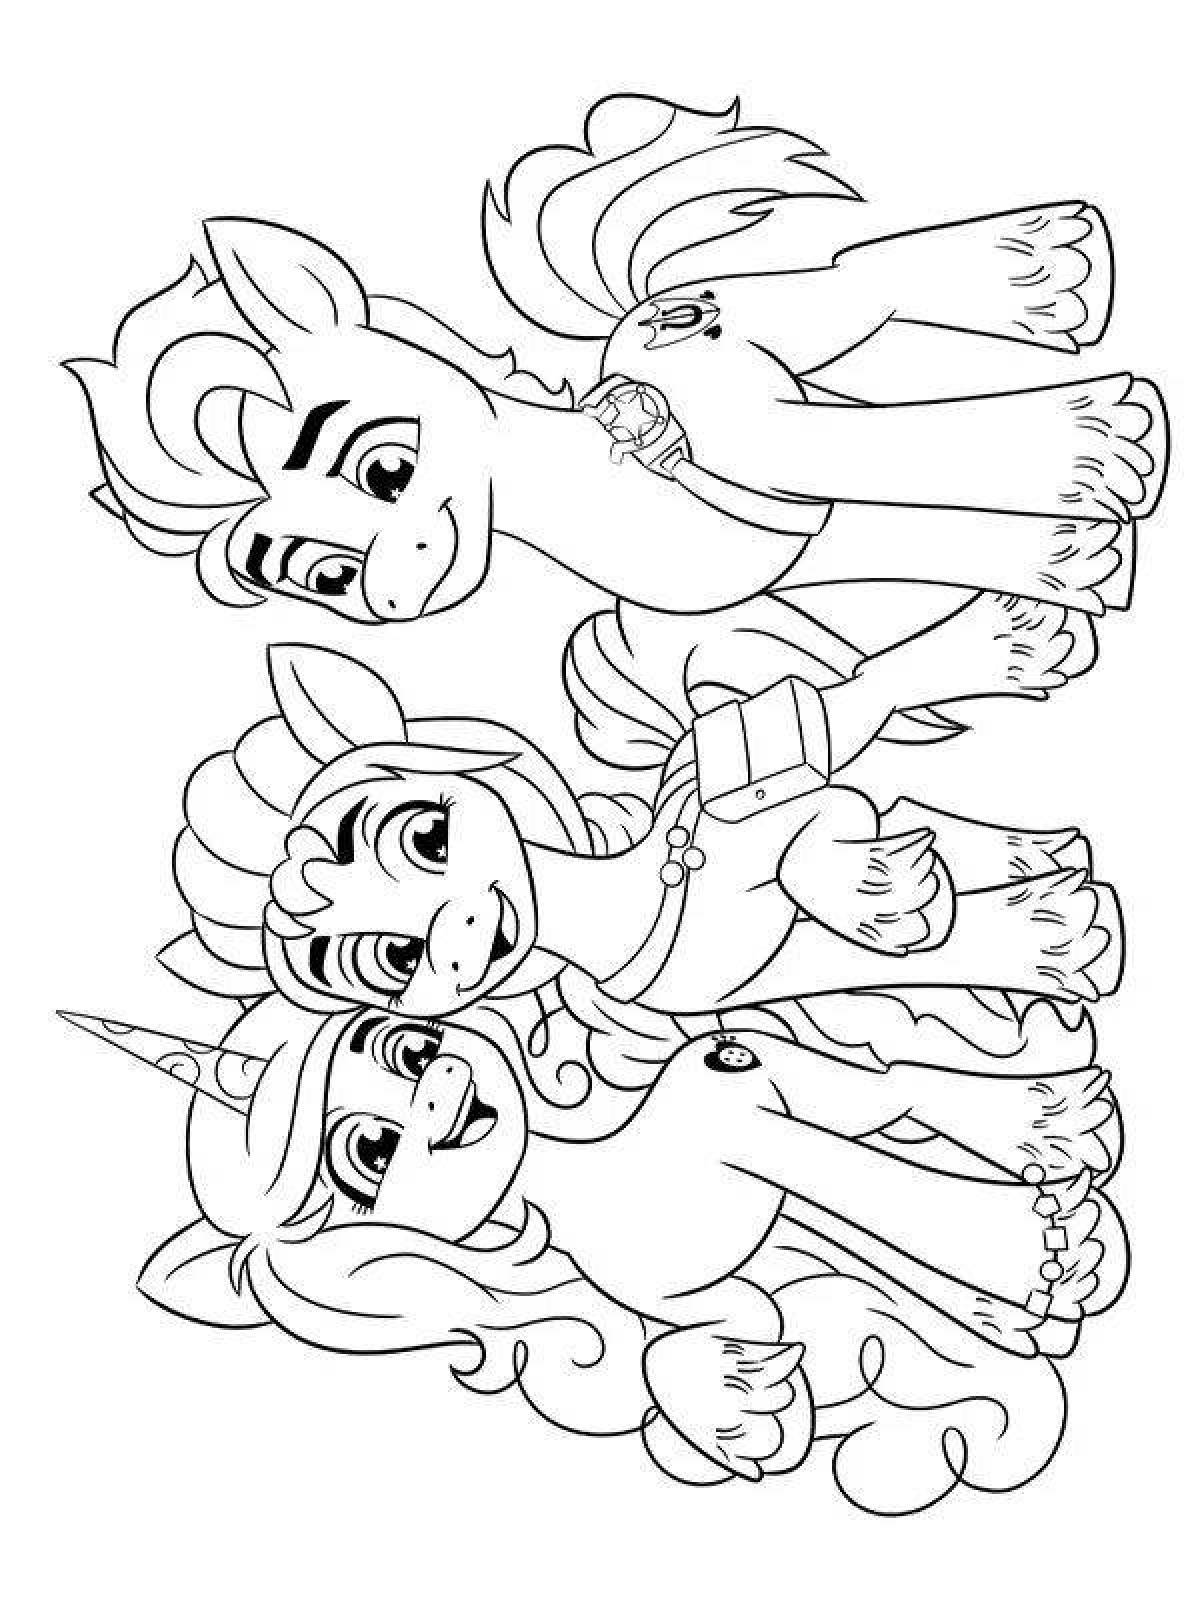 Little pony next generation coloring book